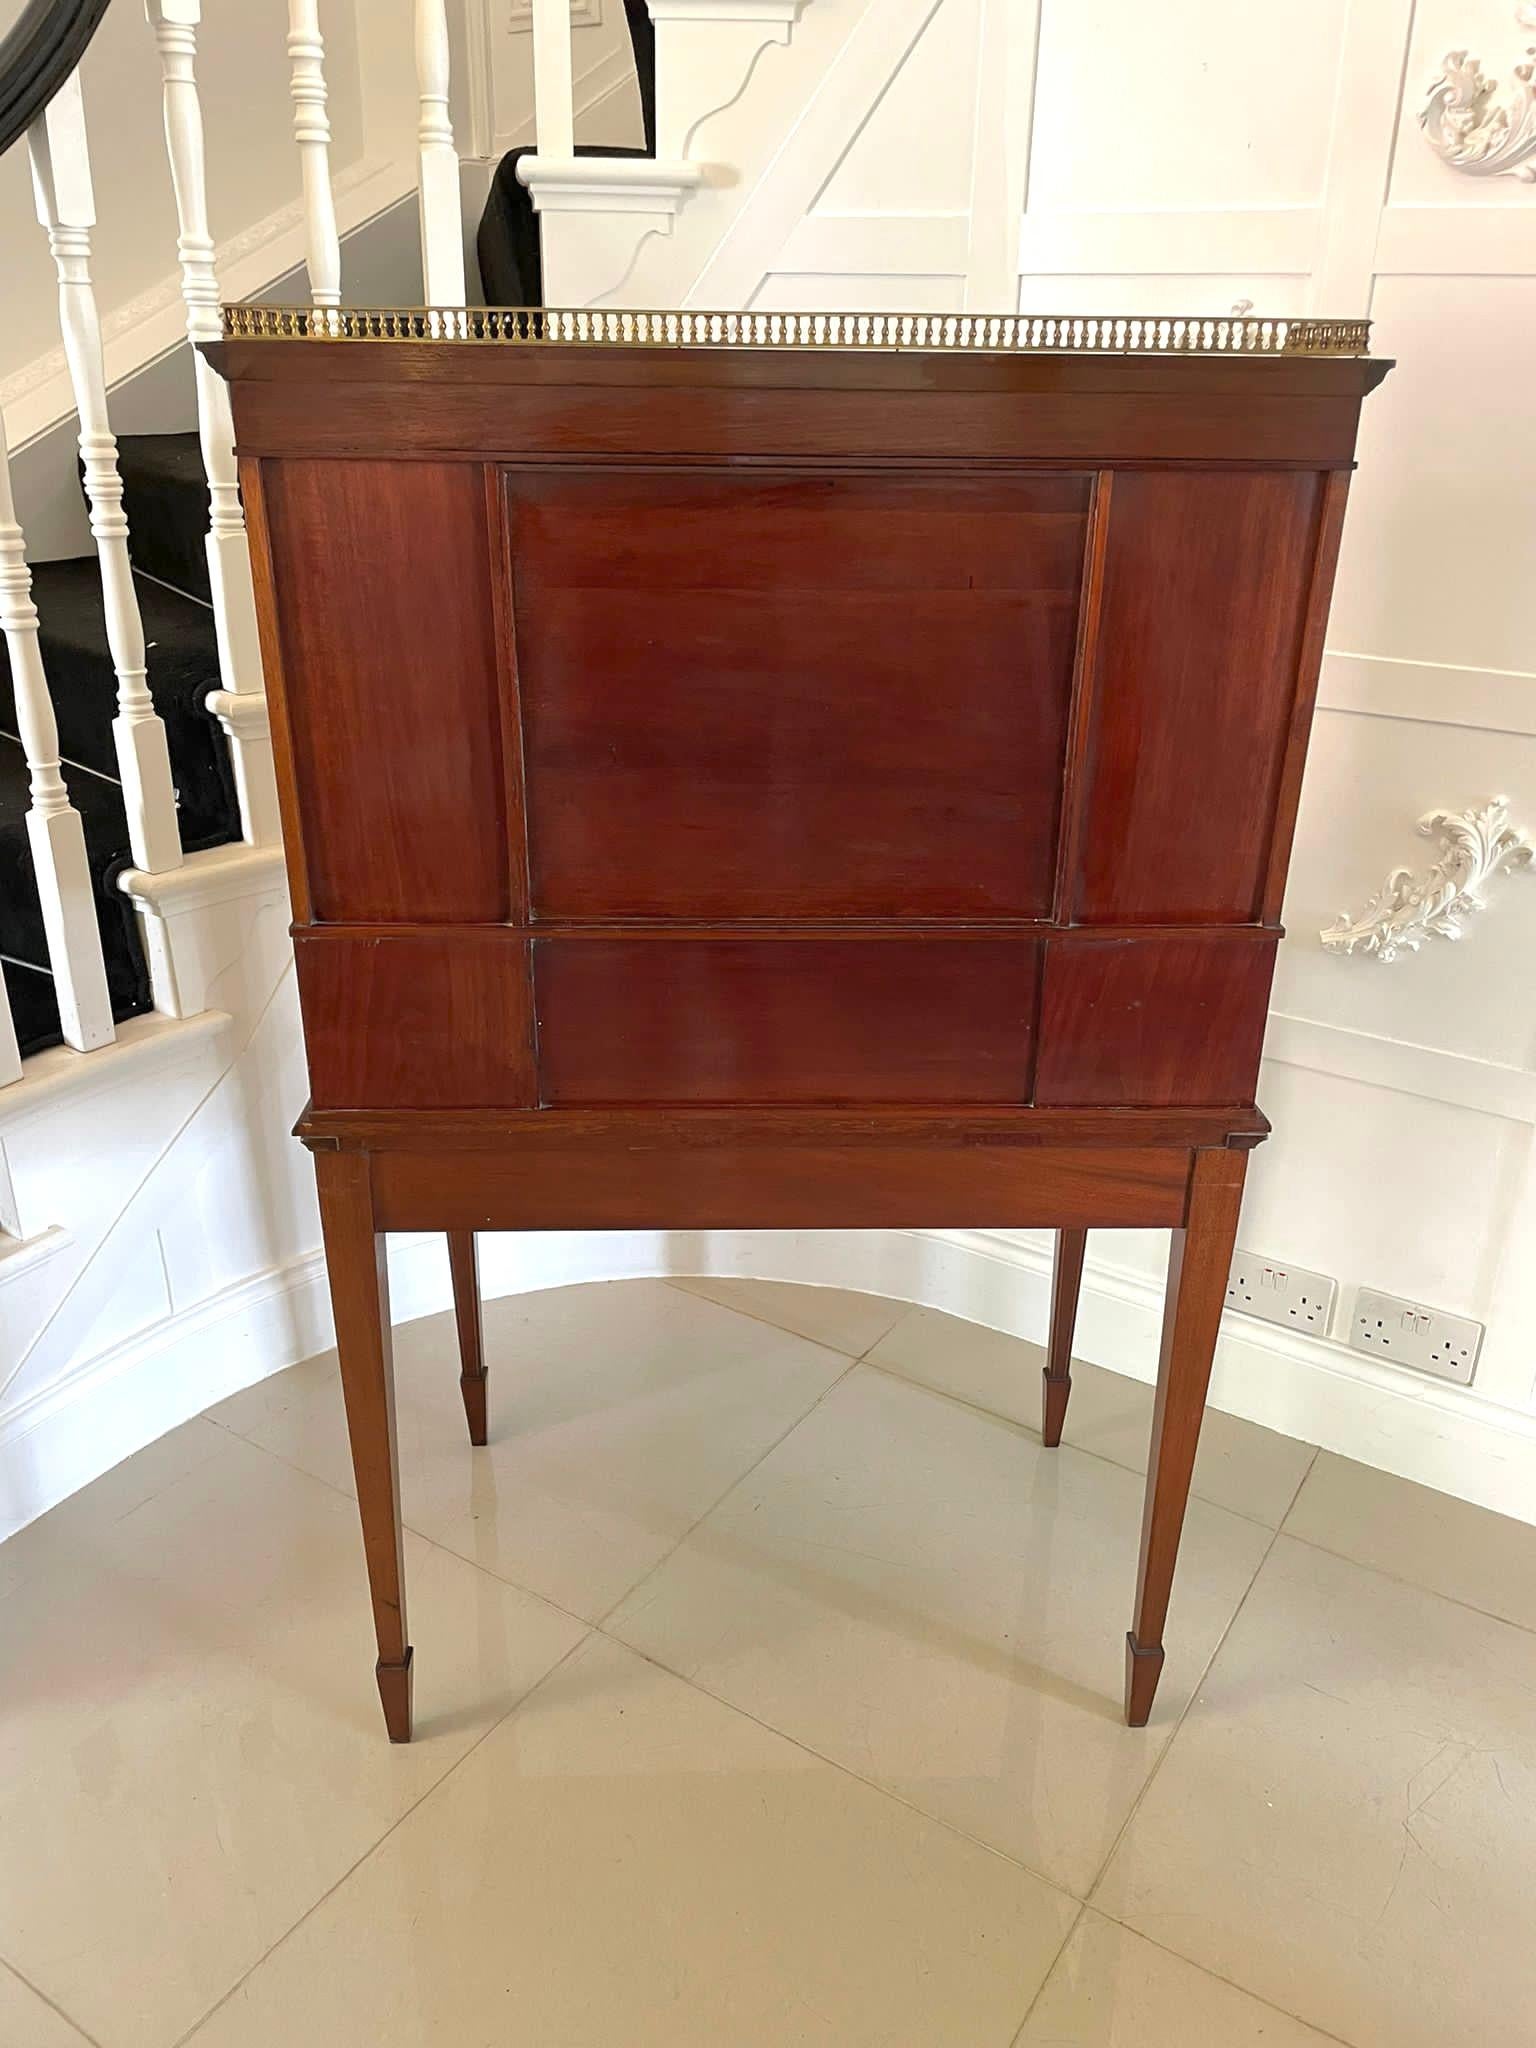 Other Outstanding Quality Antique Victorian Inlaid Mahogany Freestanding Desk For Sale